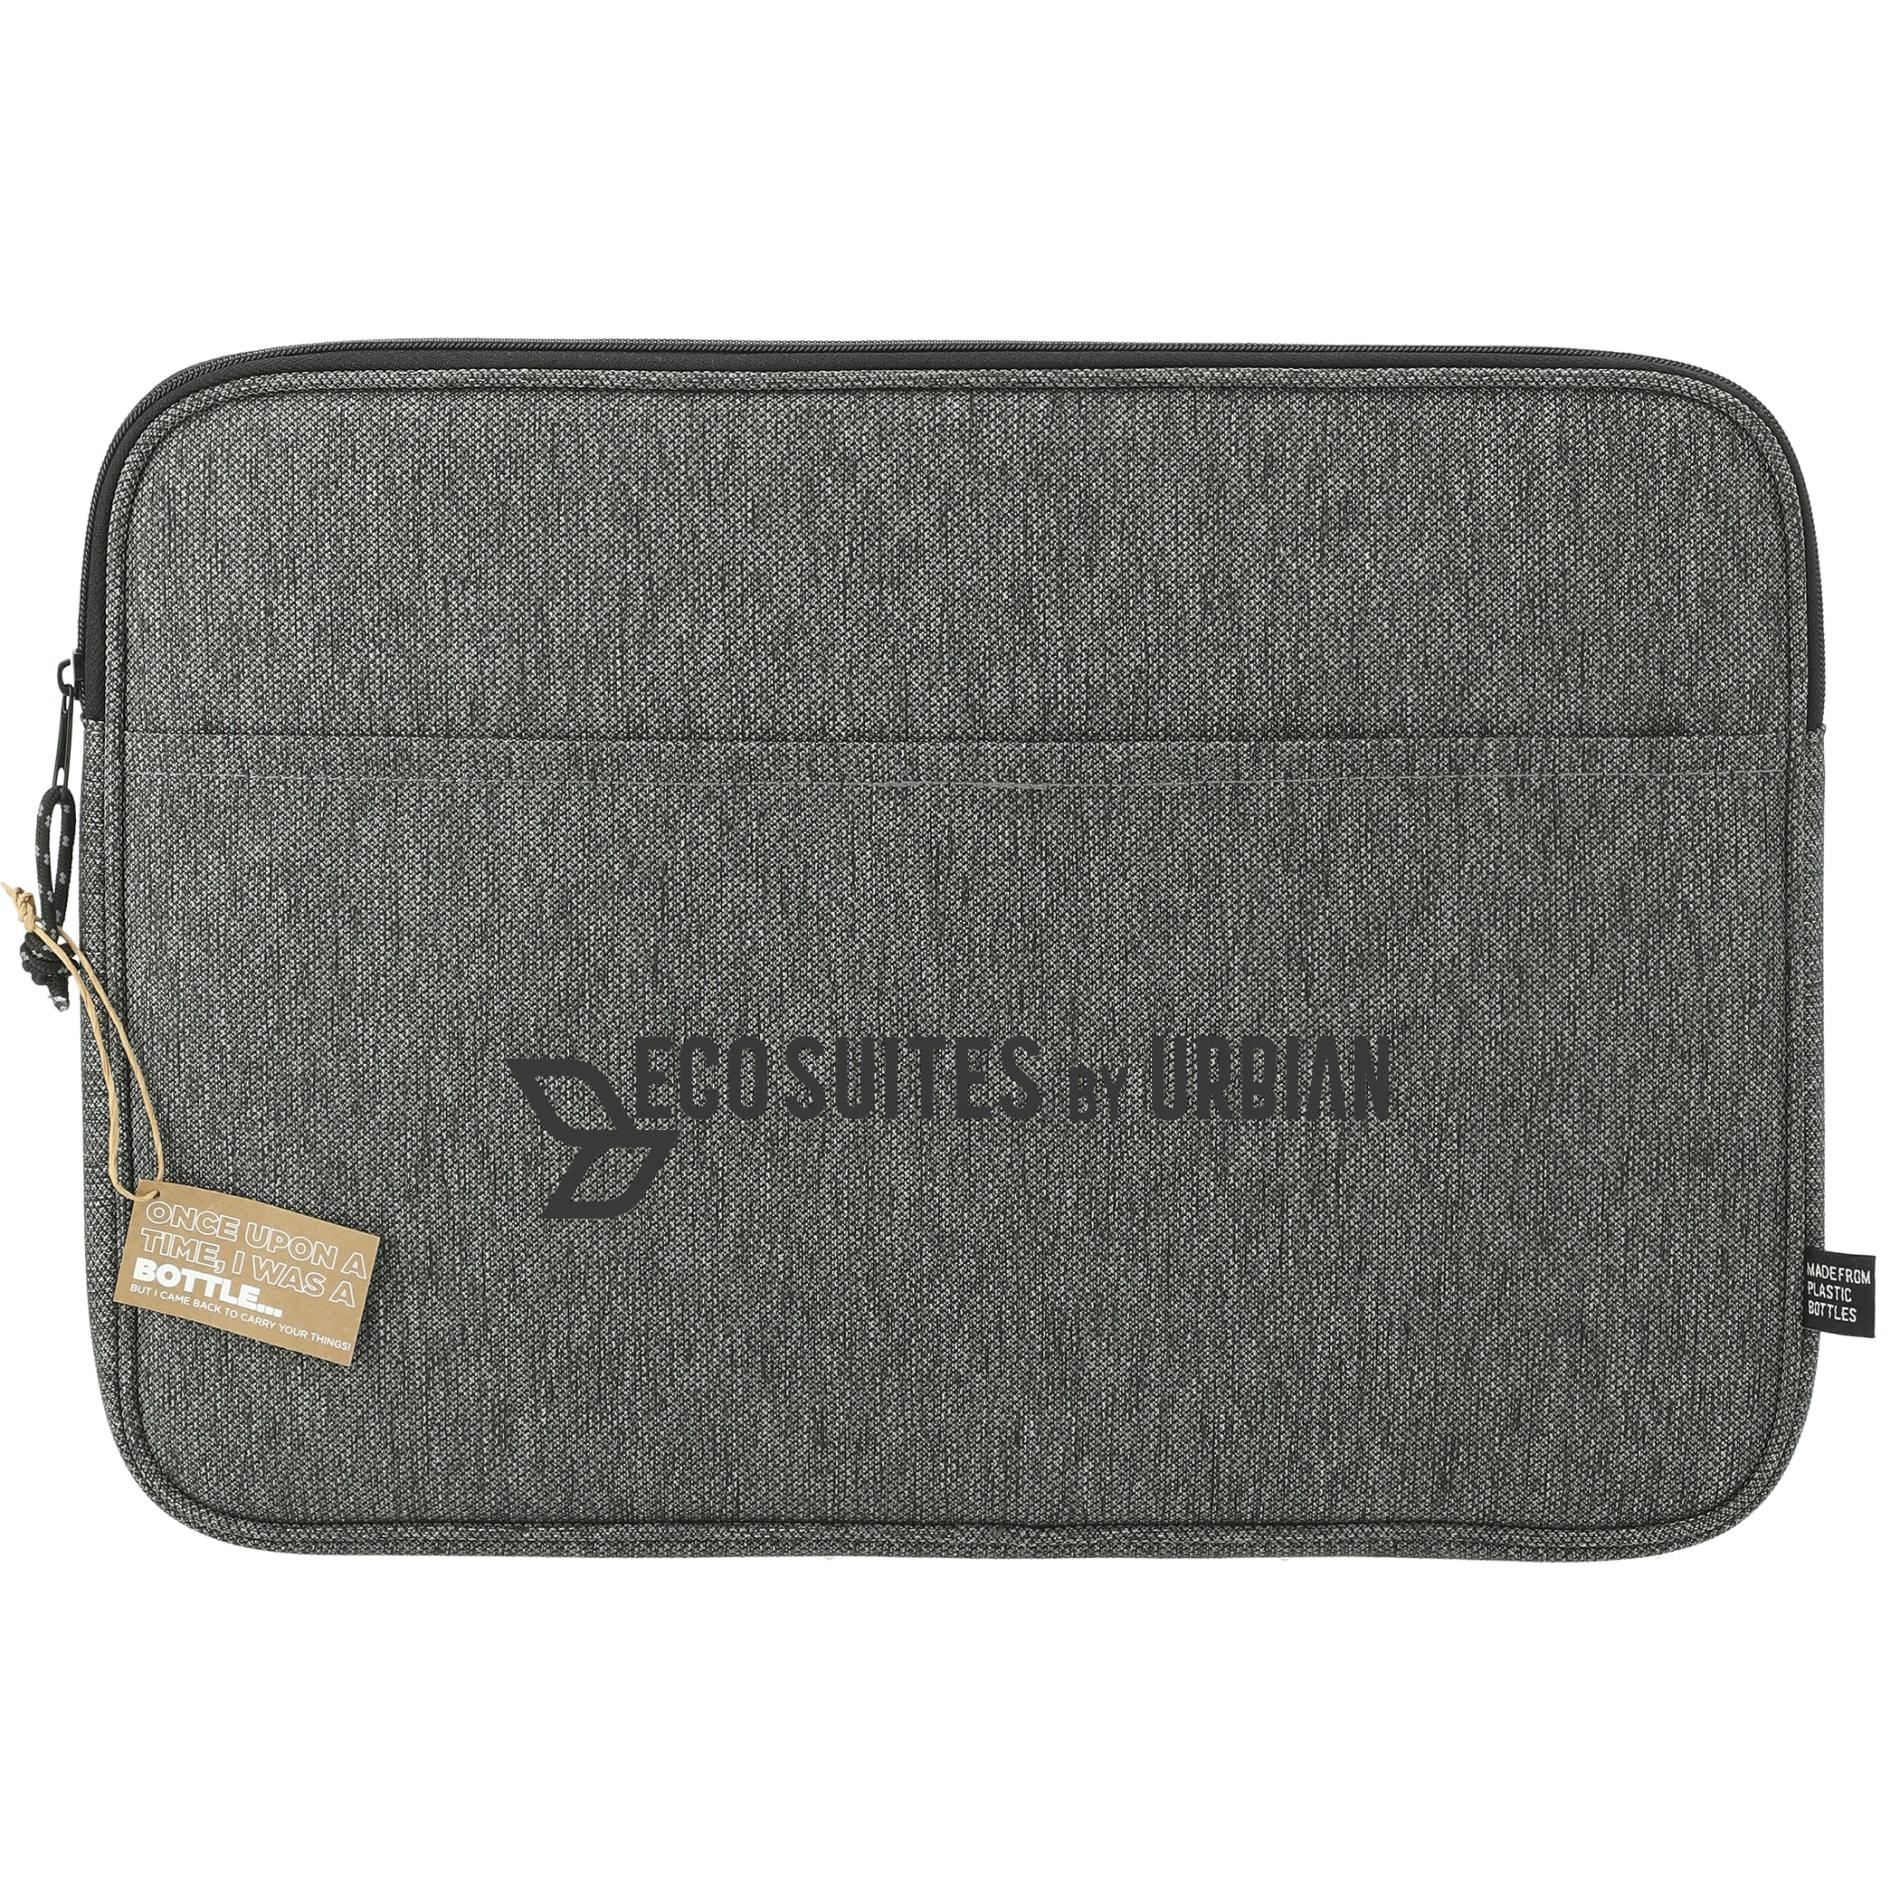 Vila Recycled 15" Computer Sleeve - additional Image 6